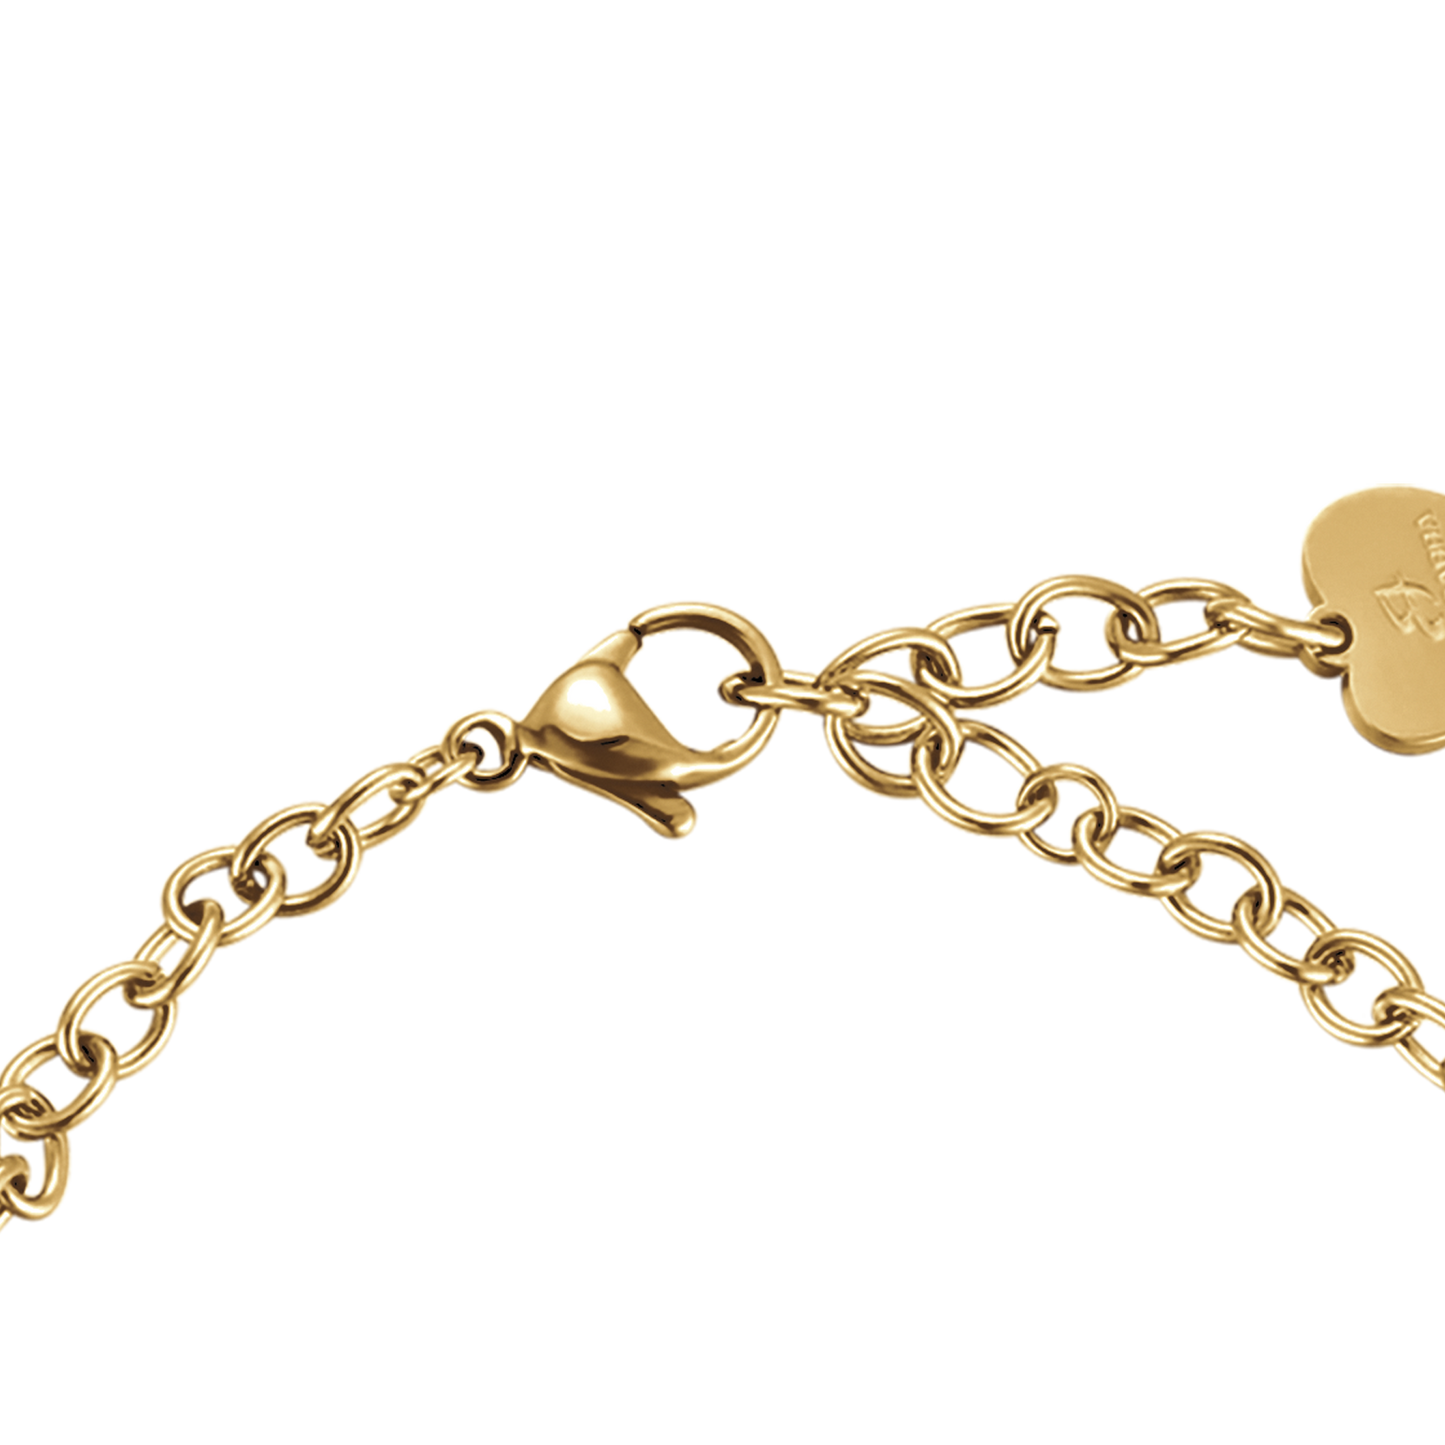 WOMAN'S BRACELET IN IP GOLD STEEL WITH CRYSTALS Luca Barra